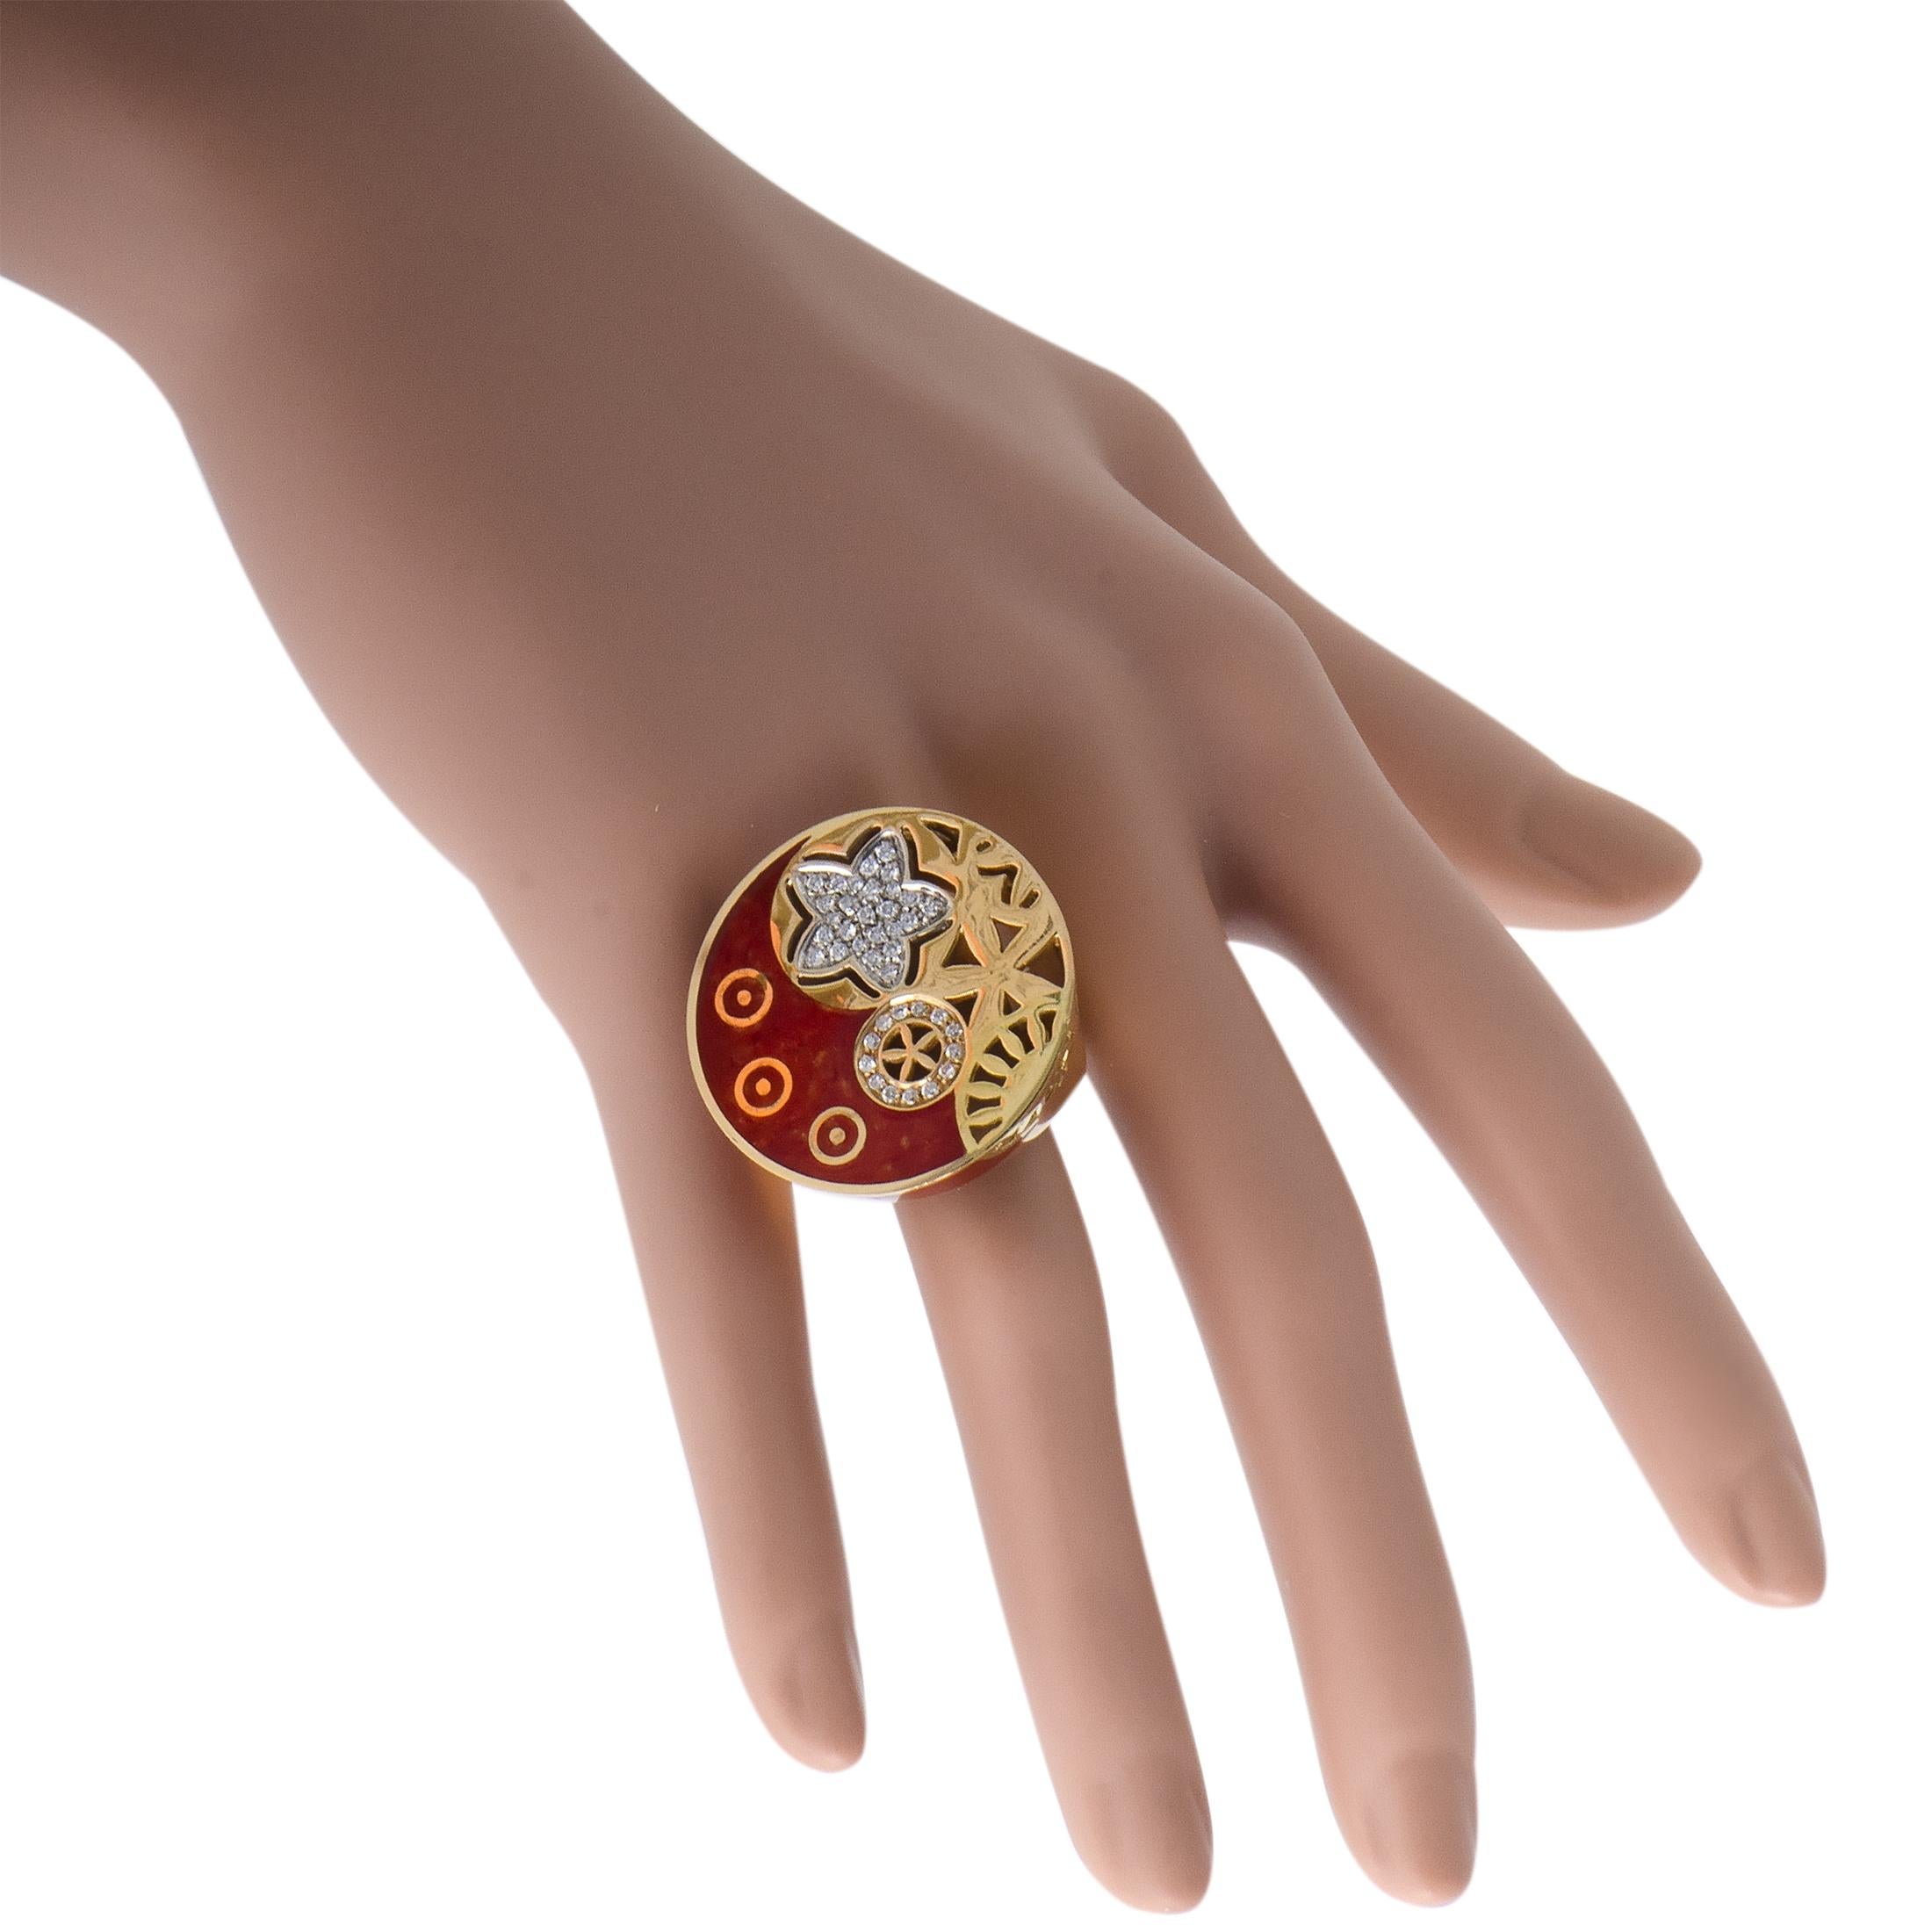 A compellingly fashionable design is marvelously presented in enchantingly radiant 18K rose gold in this exceptional jewelry piece that will embellish your look in an incredibly memorable manner. The ring is created by Nouvelle Bague and it is